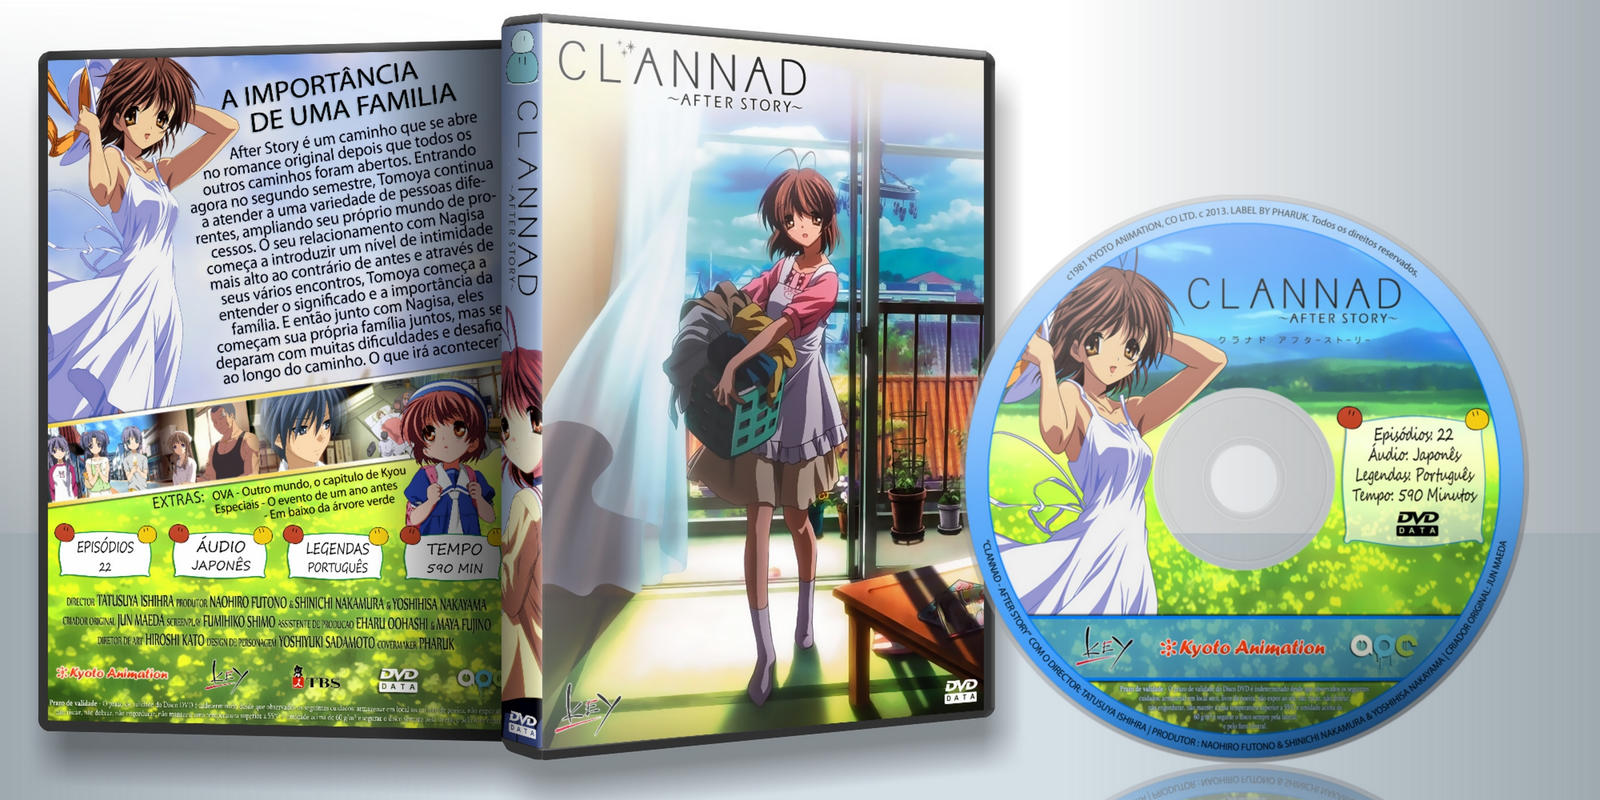 Clannad - After Story DVD Cover + Label by Pharuk on DeviantArt